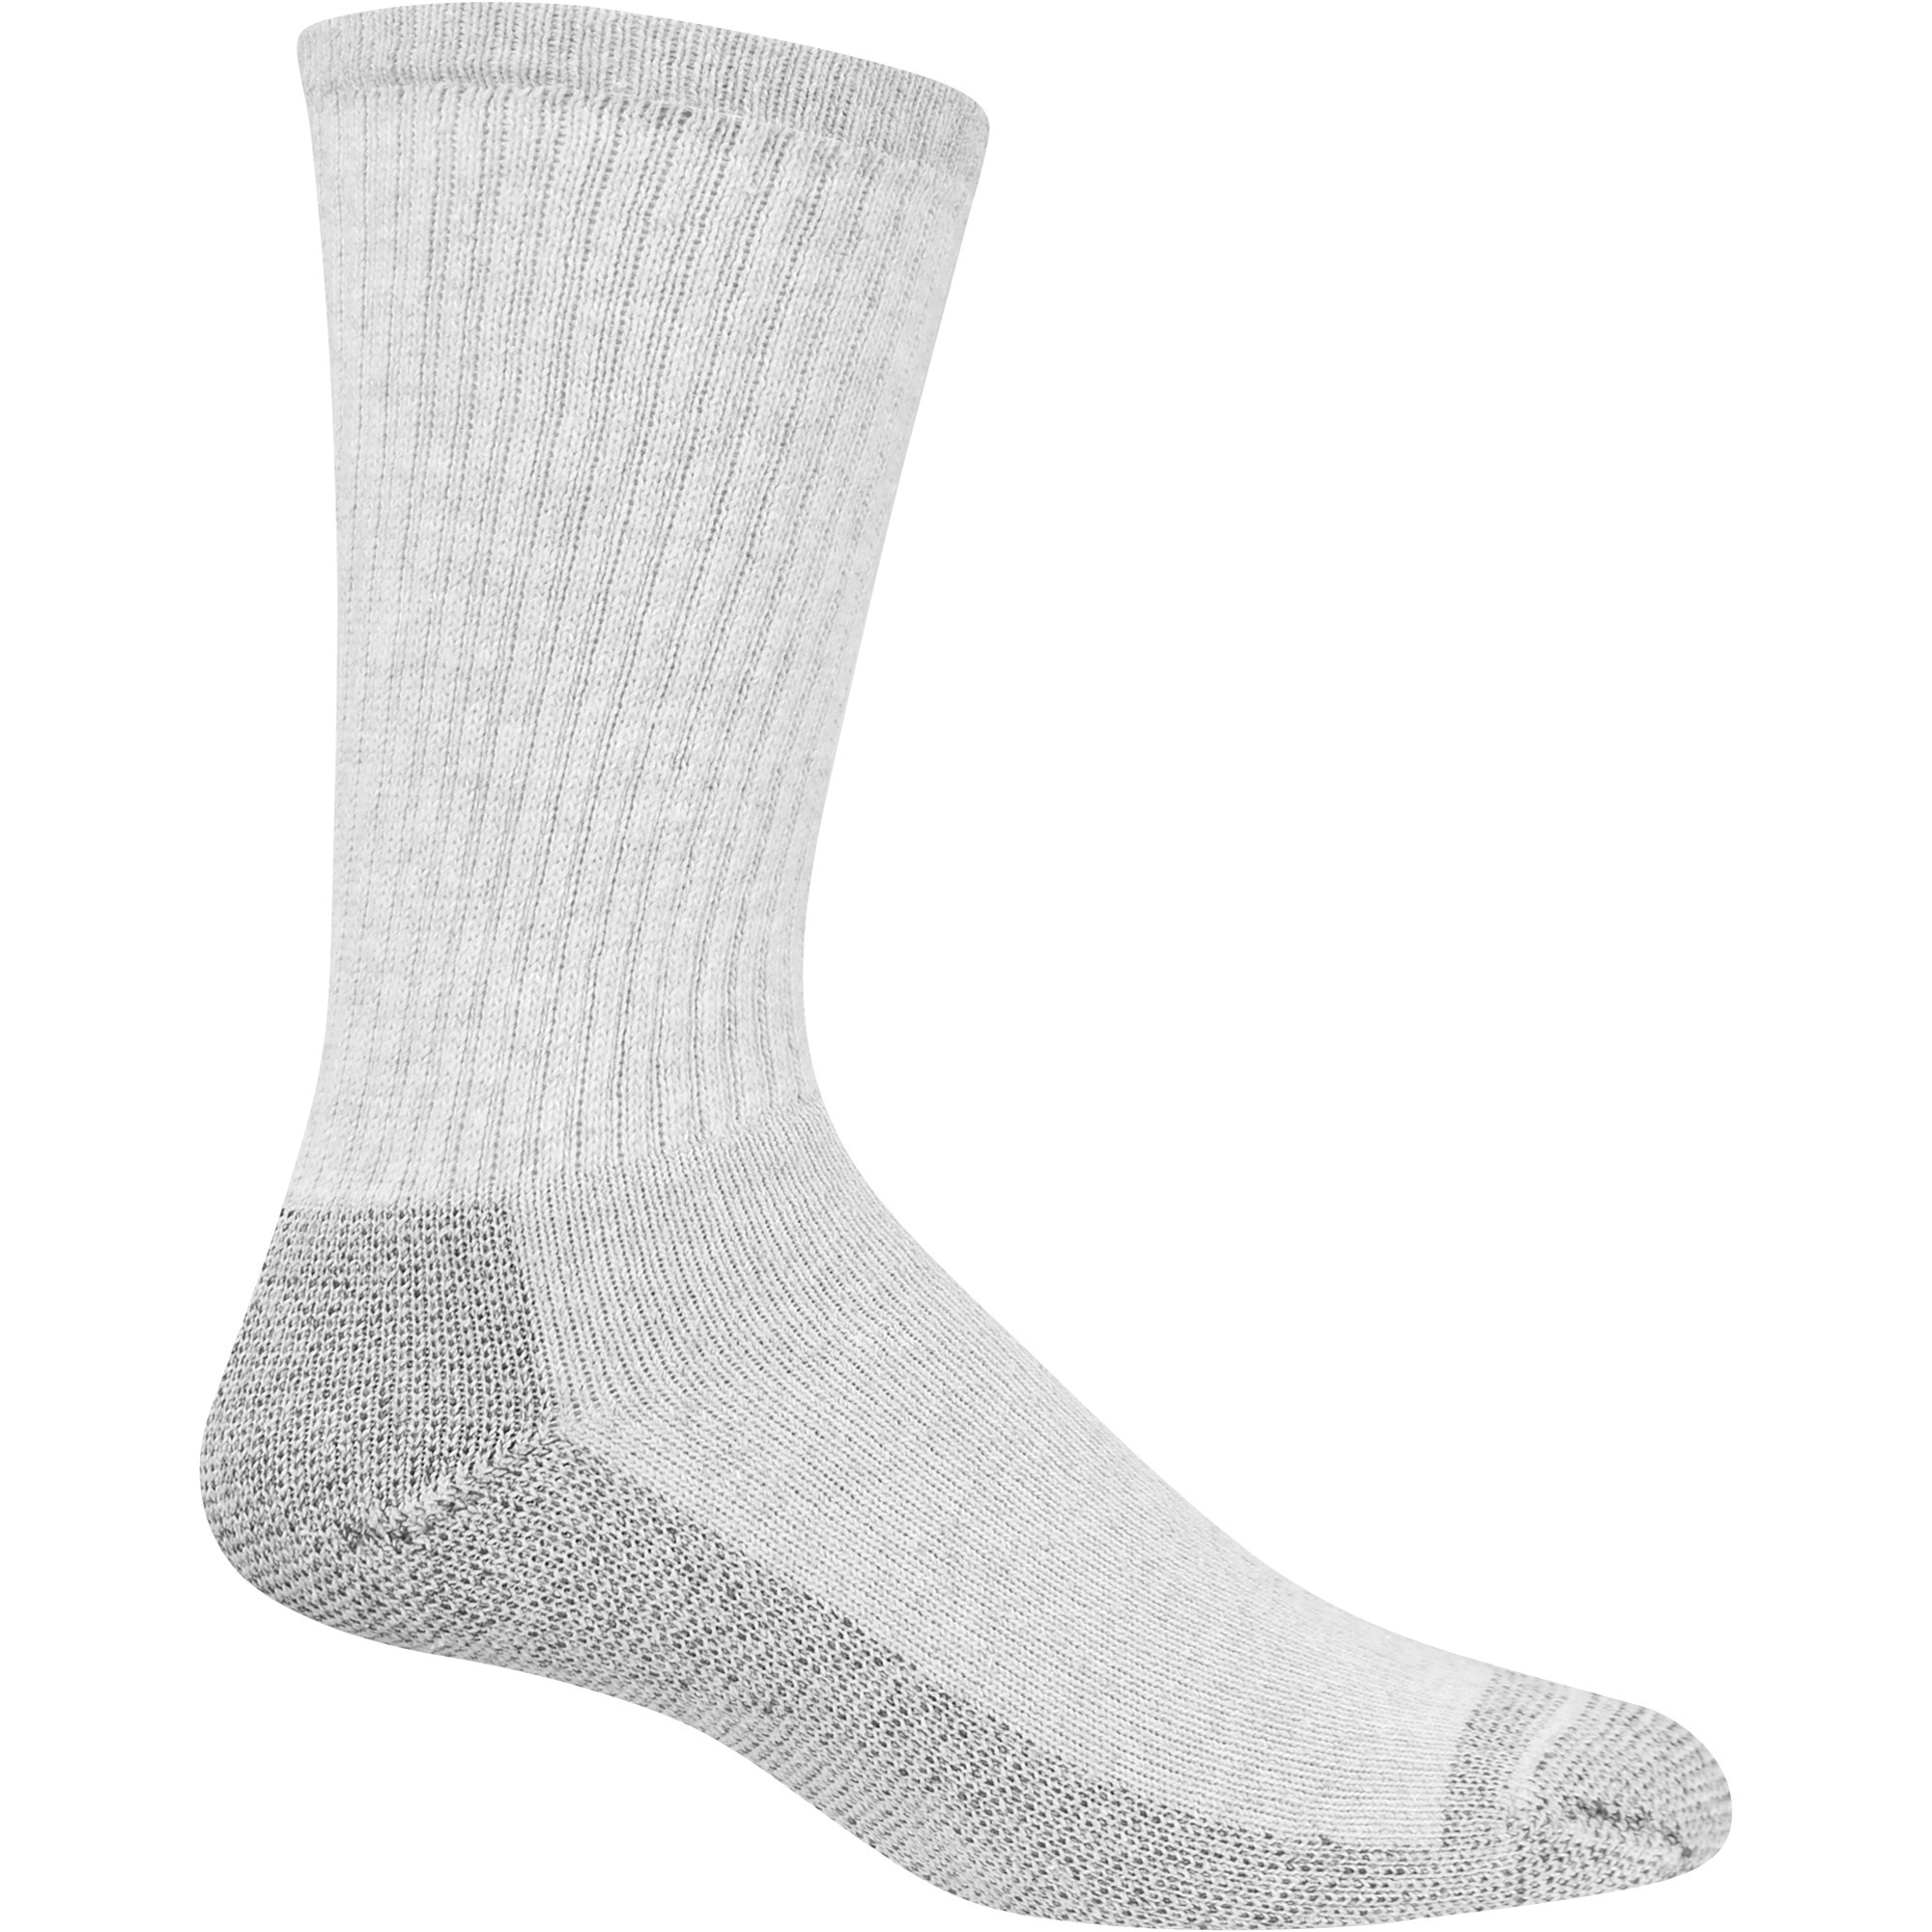 Fruit of the Loom Work Gear Poly/Cotton Crew Socks, 10 Pairs, Gray, Large, Model M8000GX GRAY